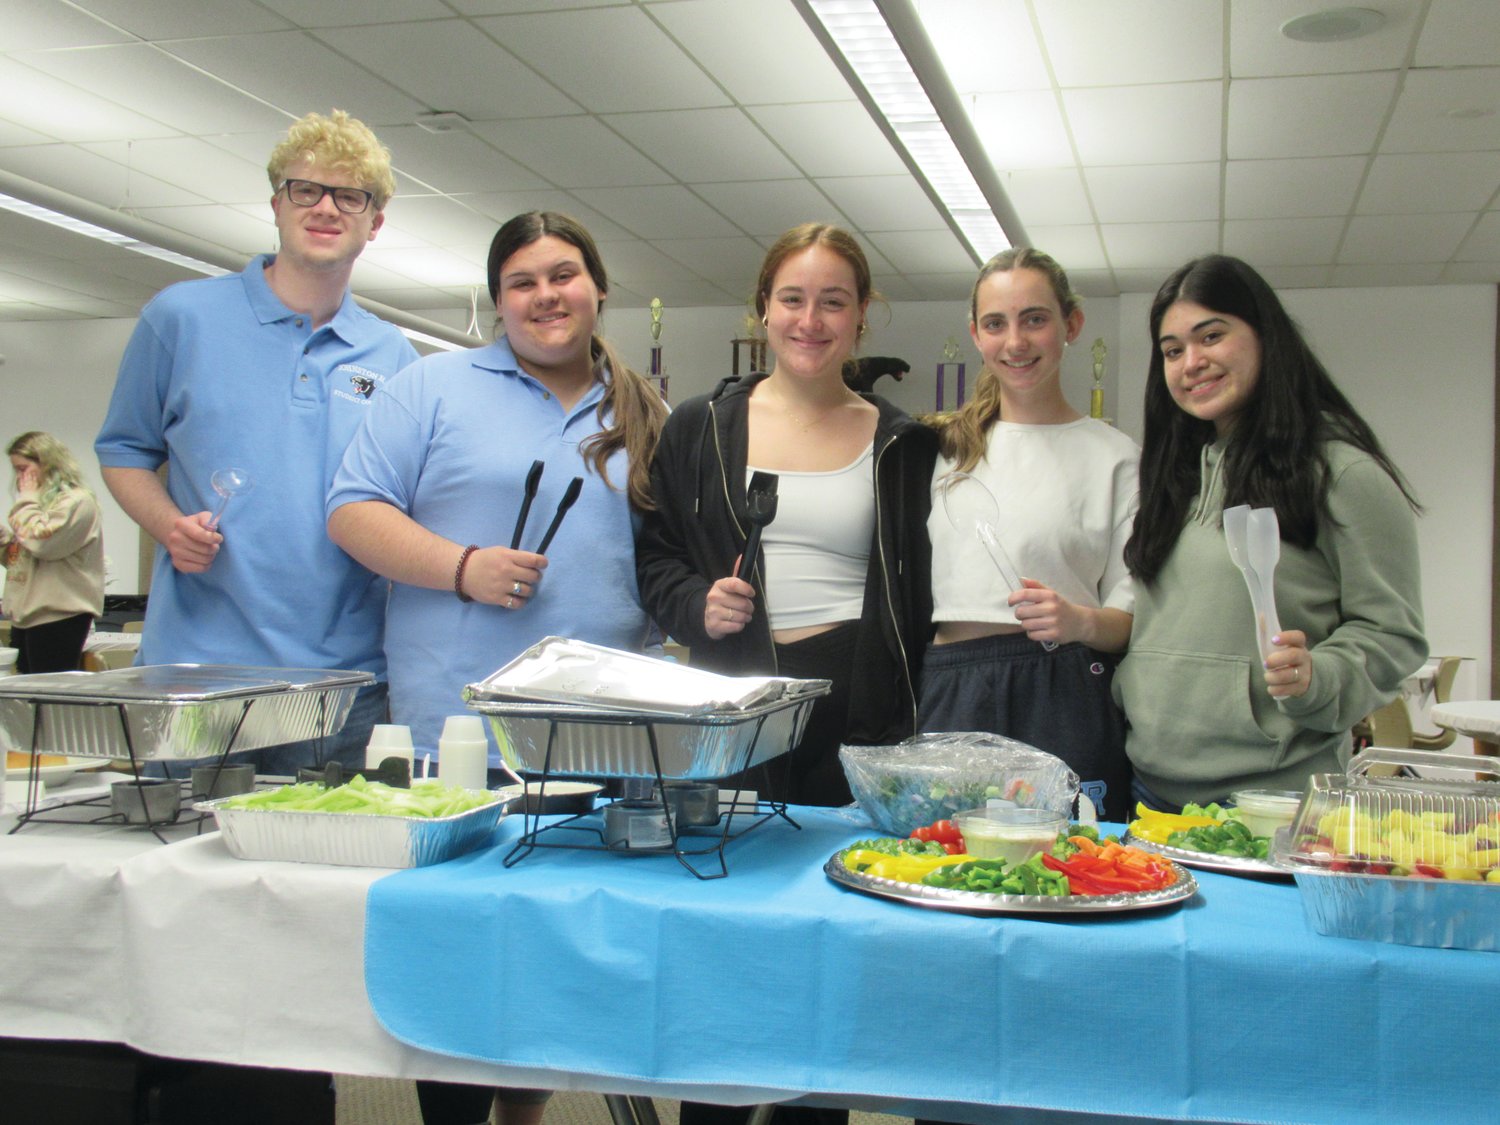 SUPER SERVERS: JHS Student Council members Jackson Troxell, Rebecca Clements, Janet Clements, Charlene Hohlmaier and Sophia Ribezzo enjoyed serving a wide variety of foods to faculty members, administrators and staffers during last week’s Teacher Appreciation Luncheon.